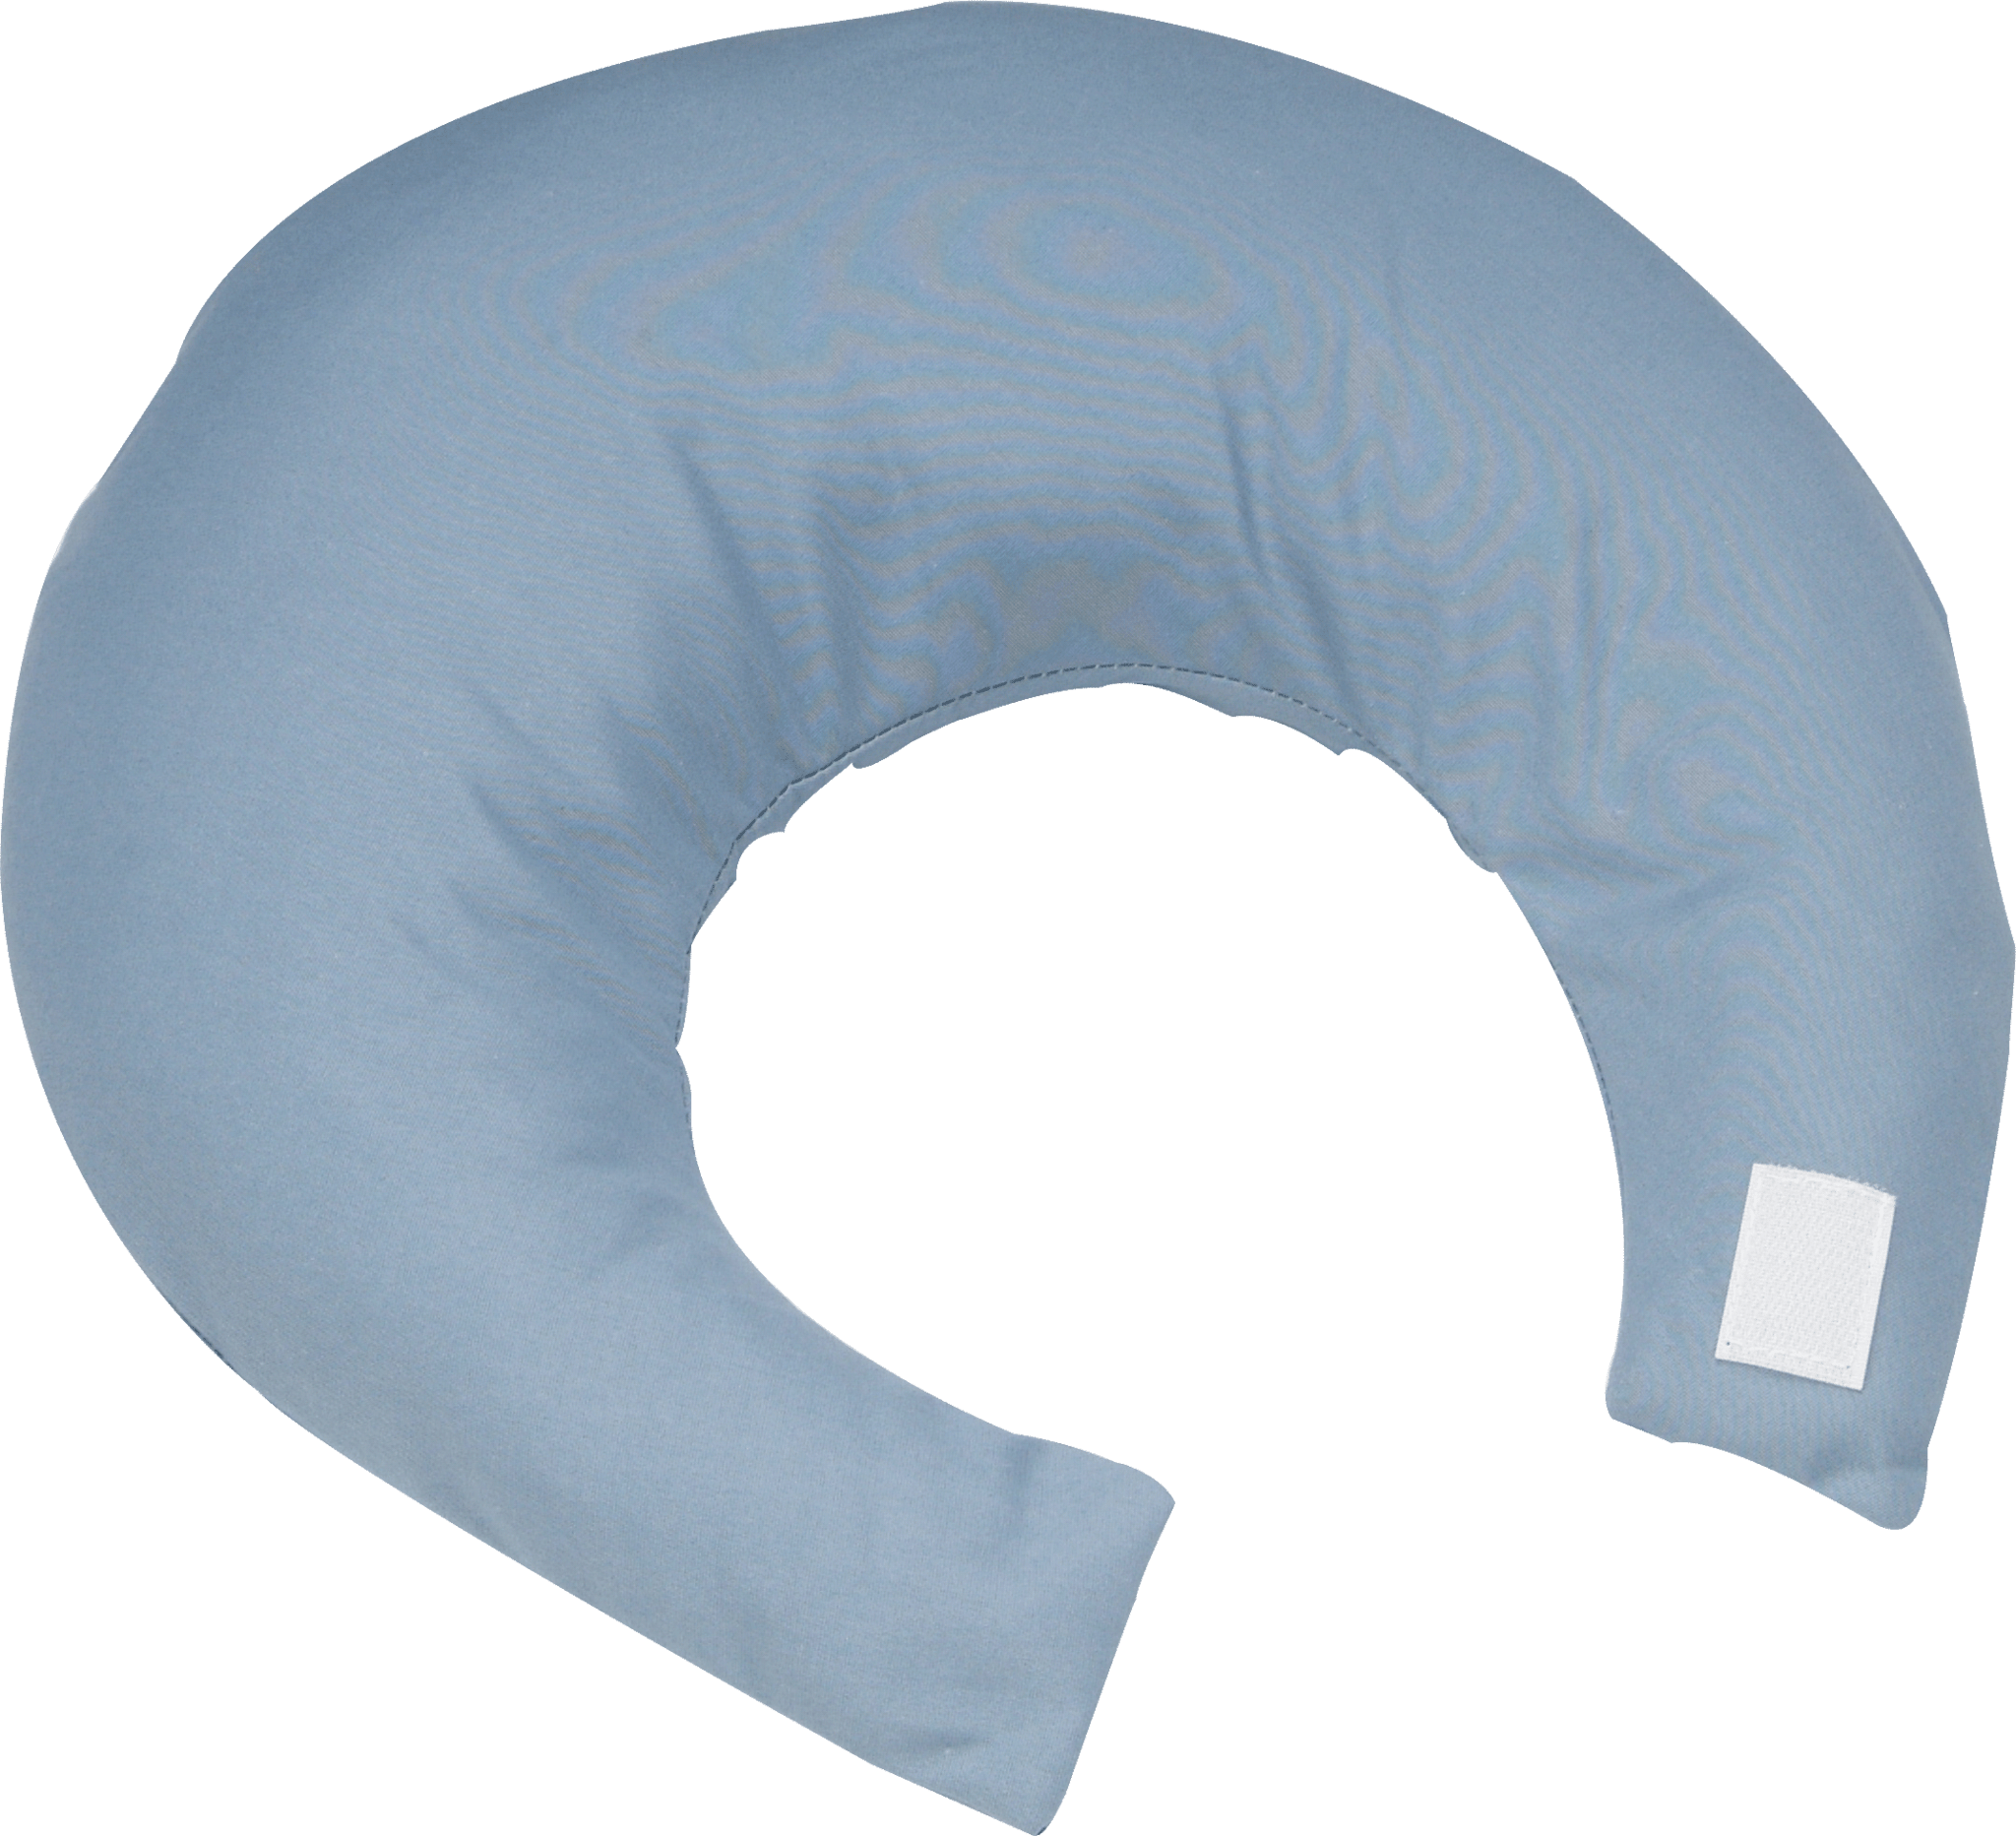 EA/1 - Hermell Products Comfy Crescent Pillow with Blue Satin Zippered Cover, One Size Fits All - Best Buy Medical Supplies